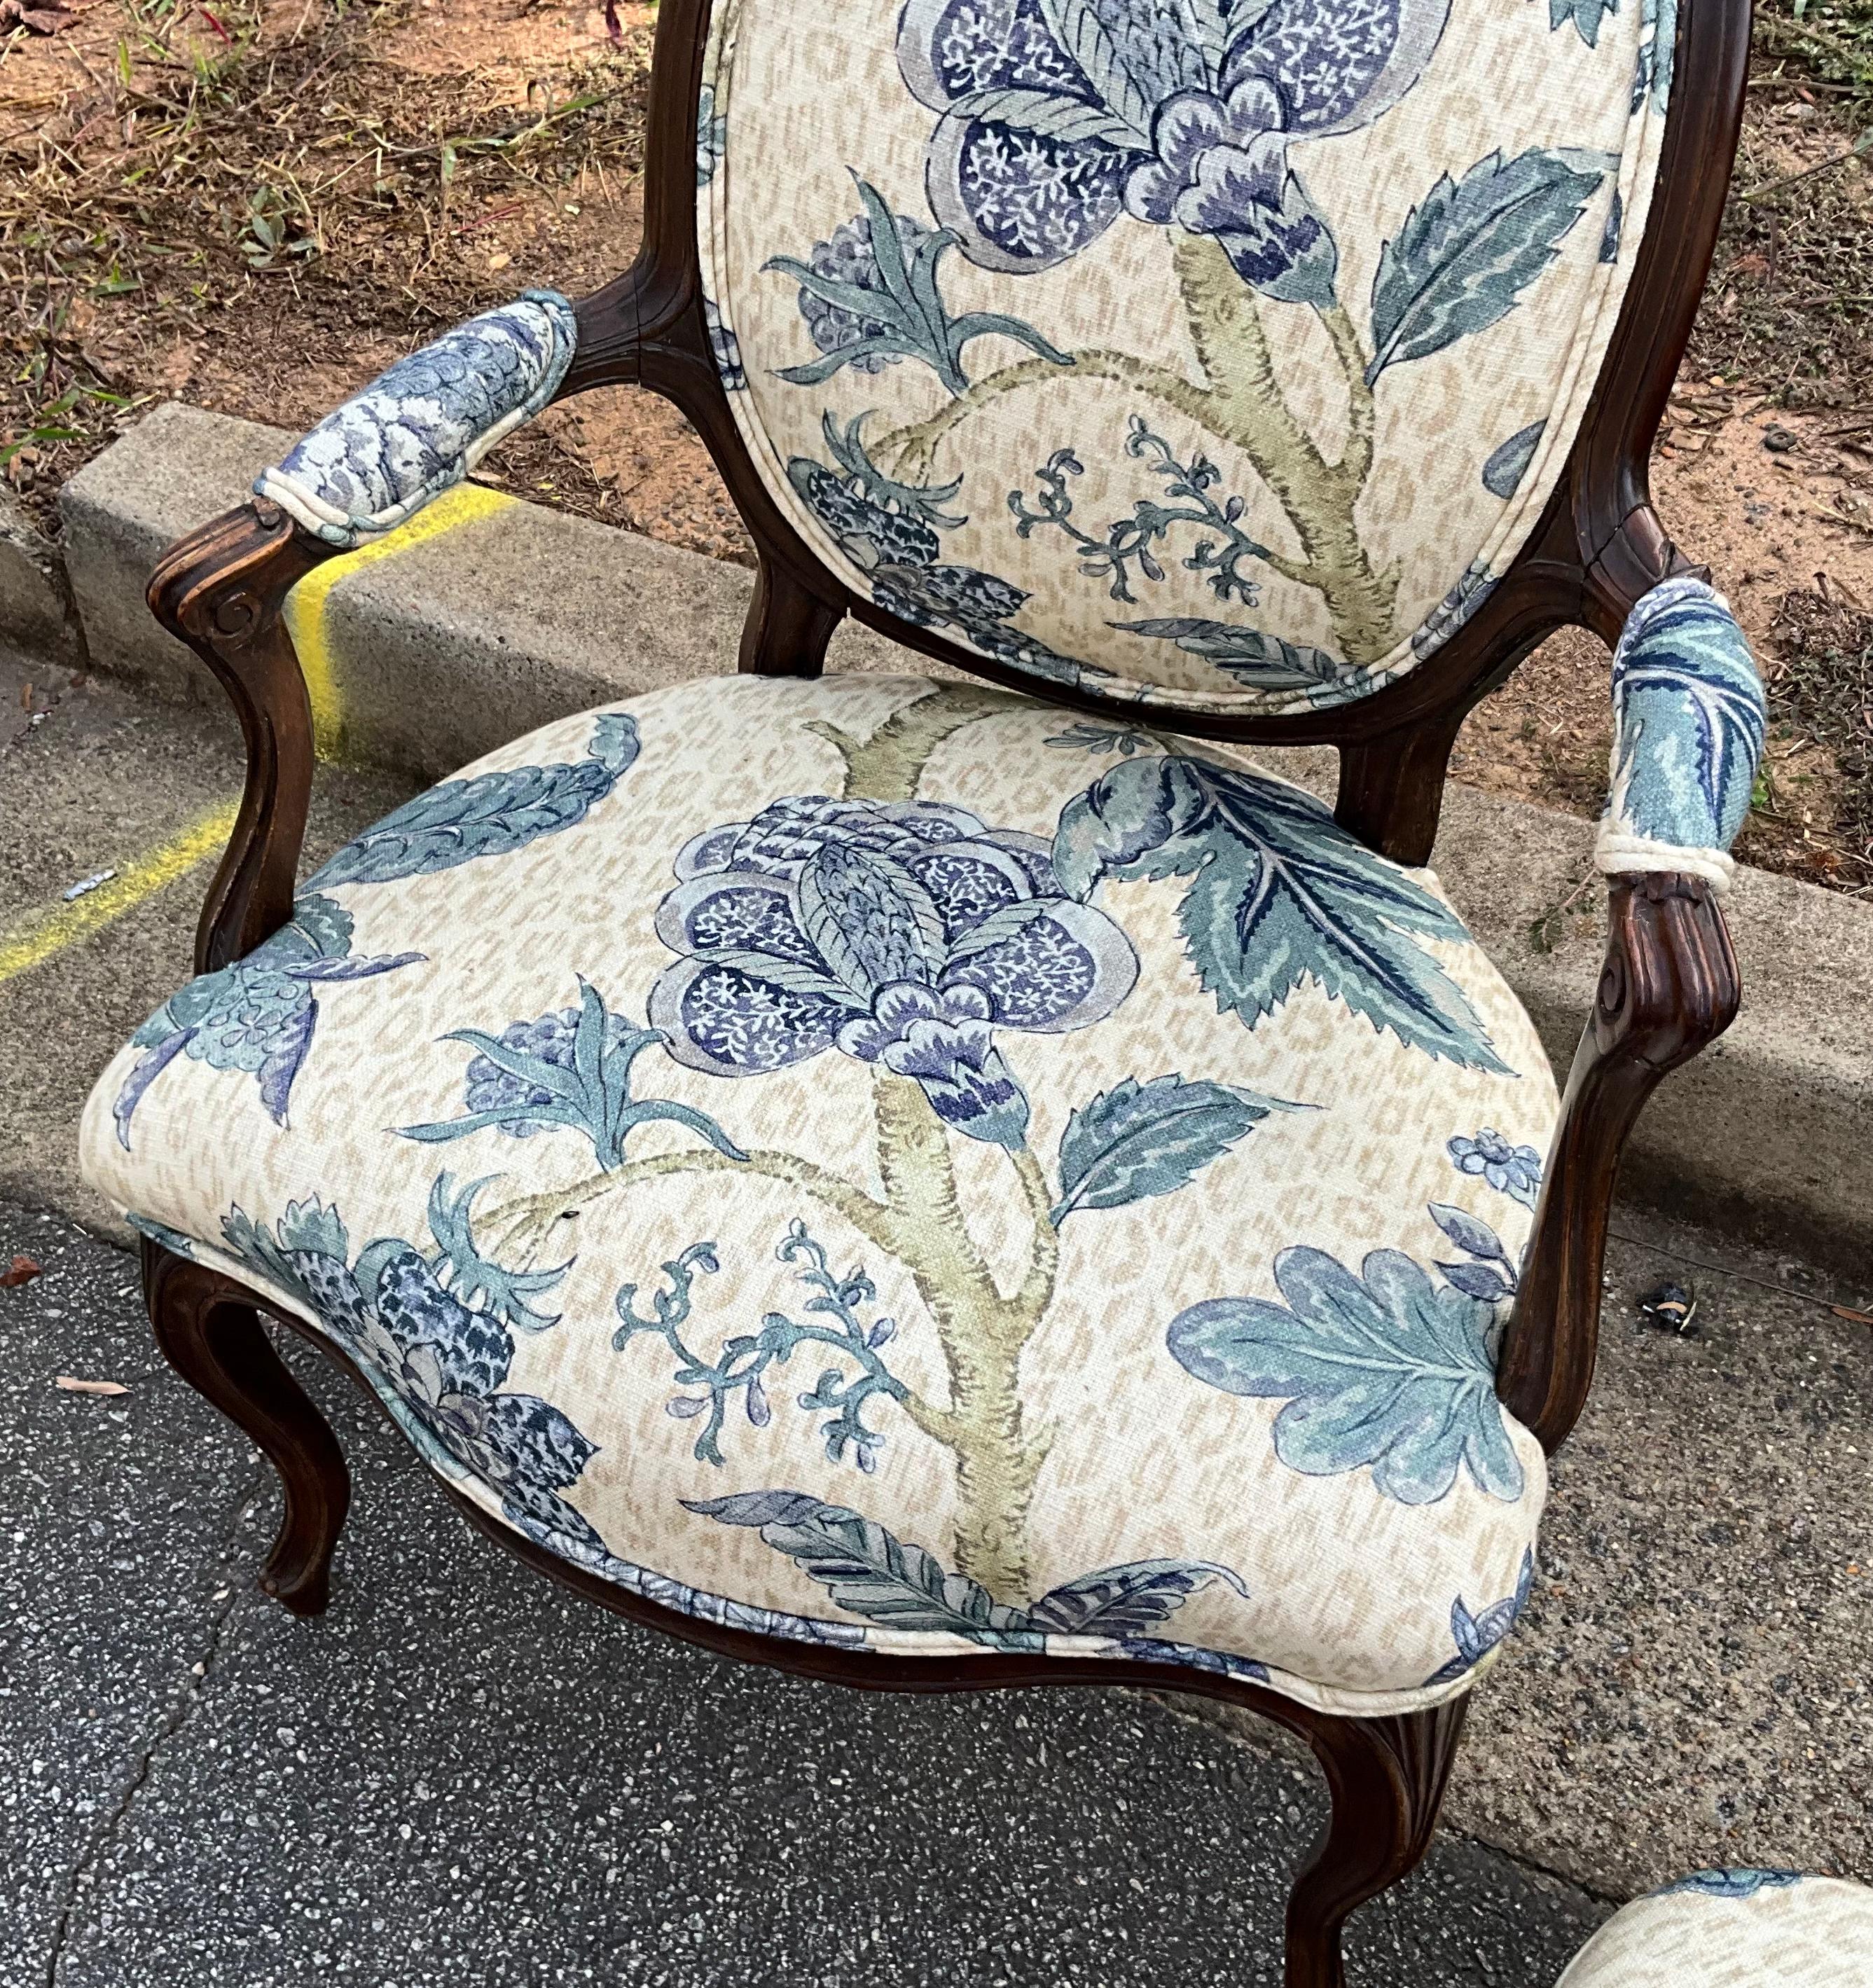 20th Century Antique French Fruitwood Berger Chair & Ottoman In Blue Floral & Leopard - S/2 For Sale